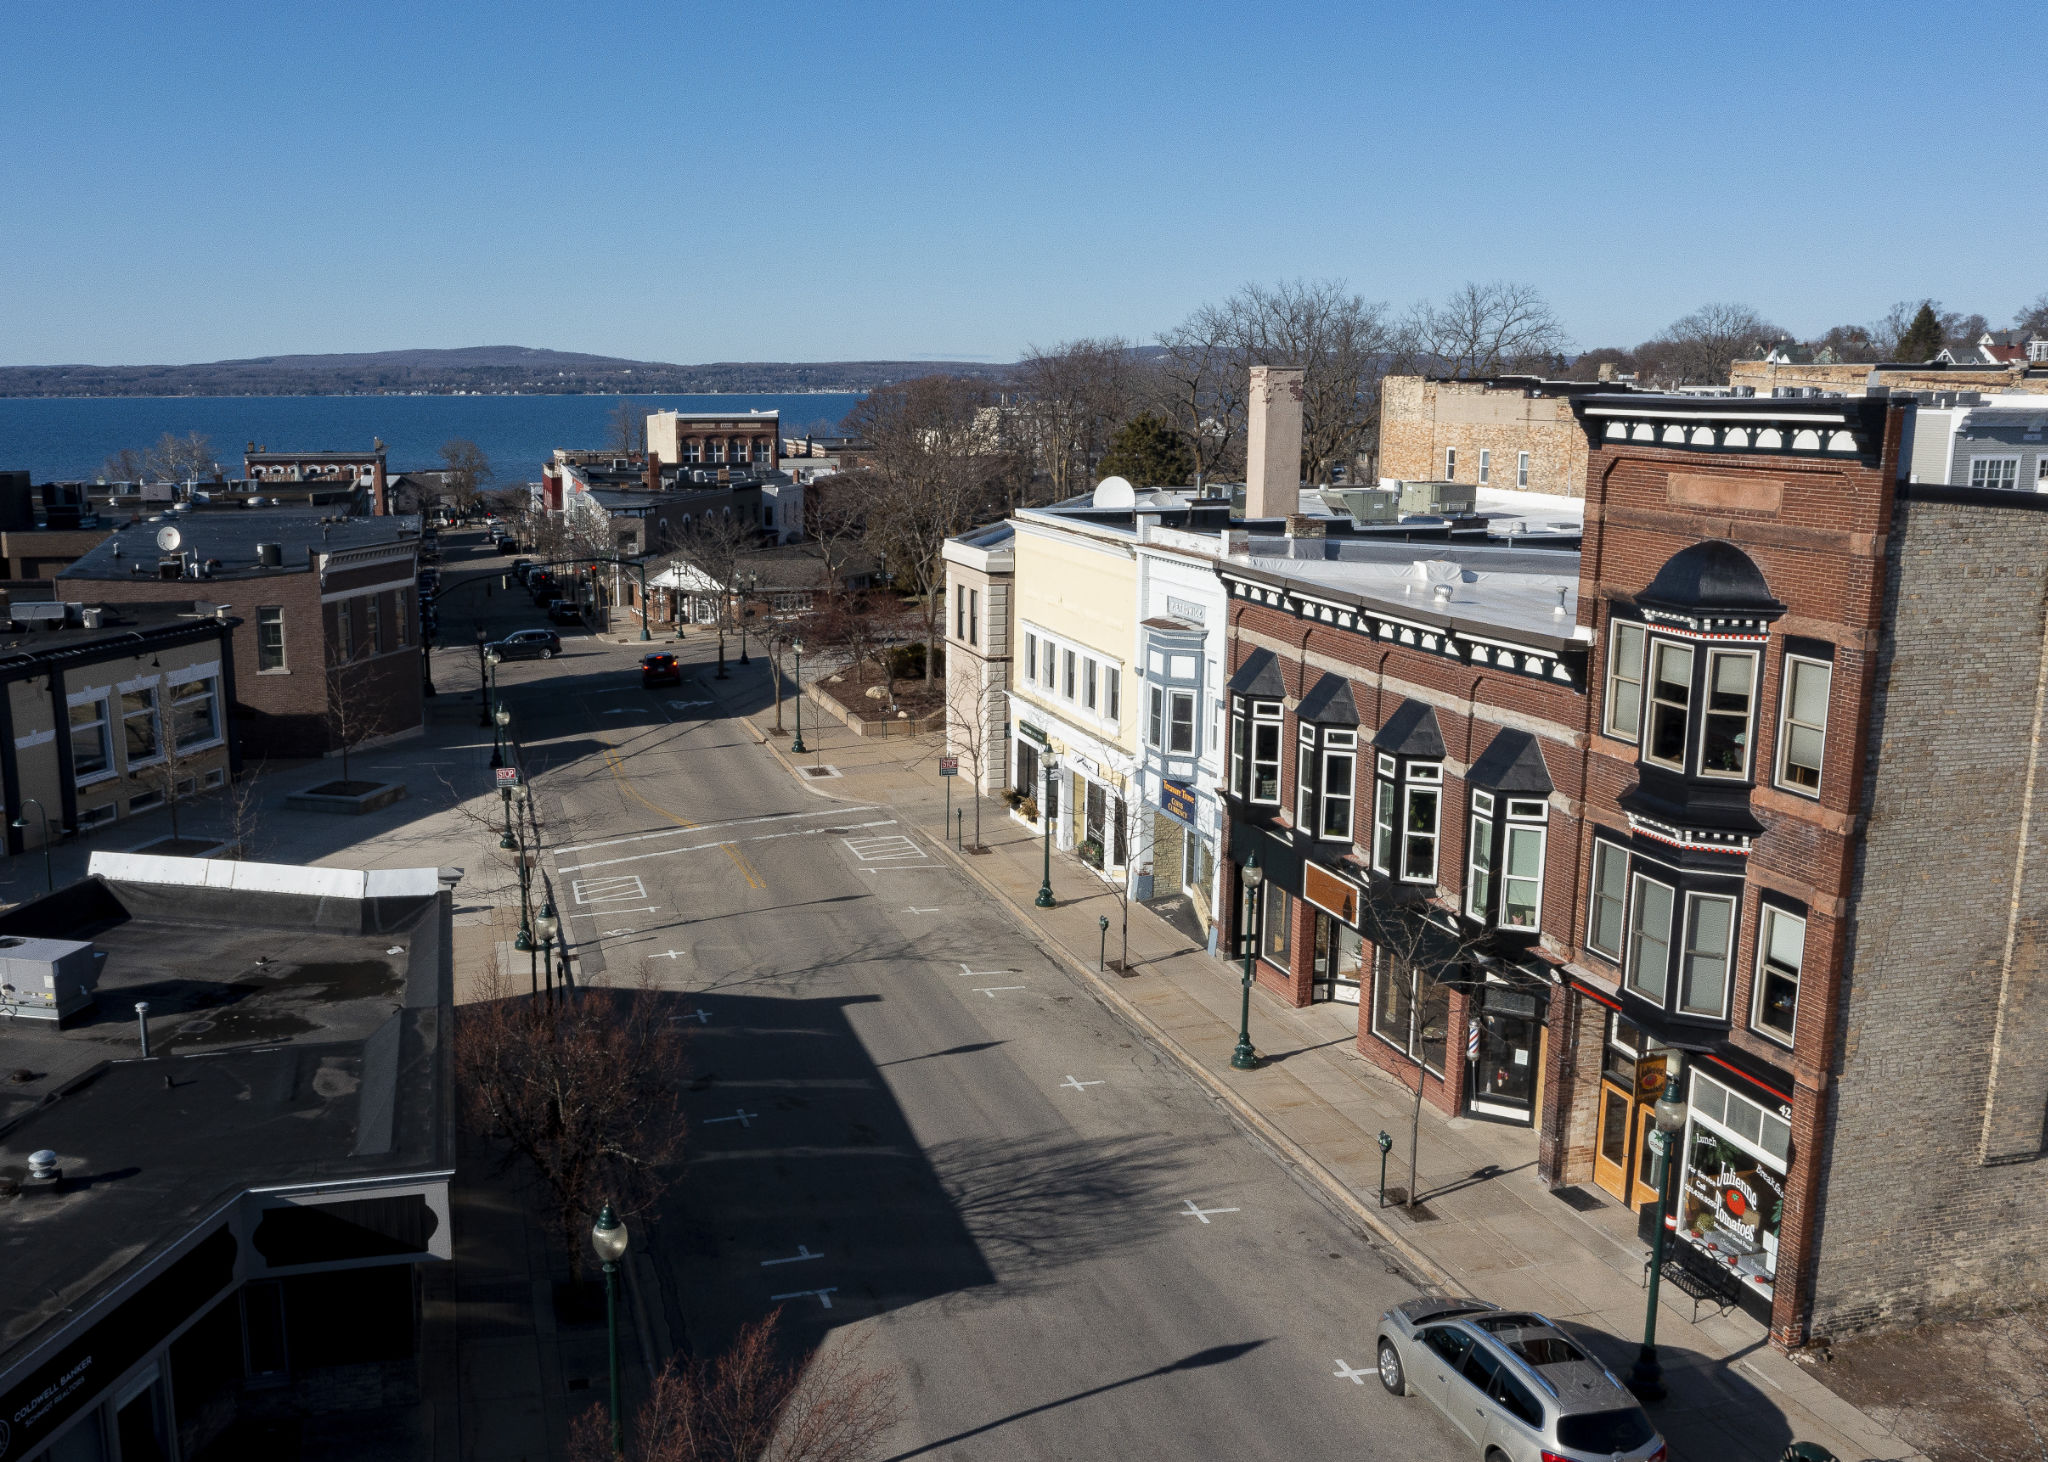 NorthCoast.work at 417 Howard St, looking North over Little Traverse Bay